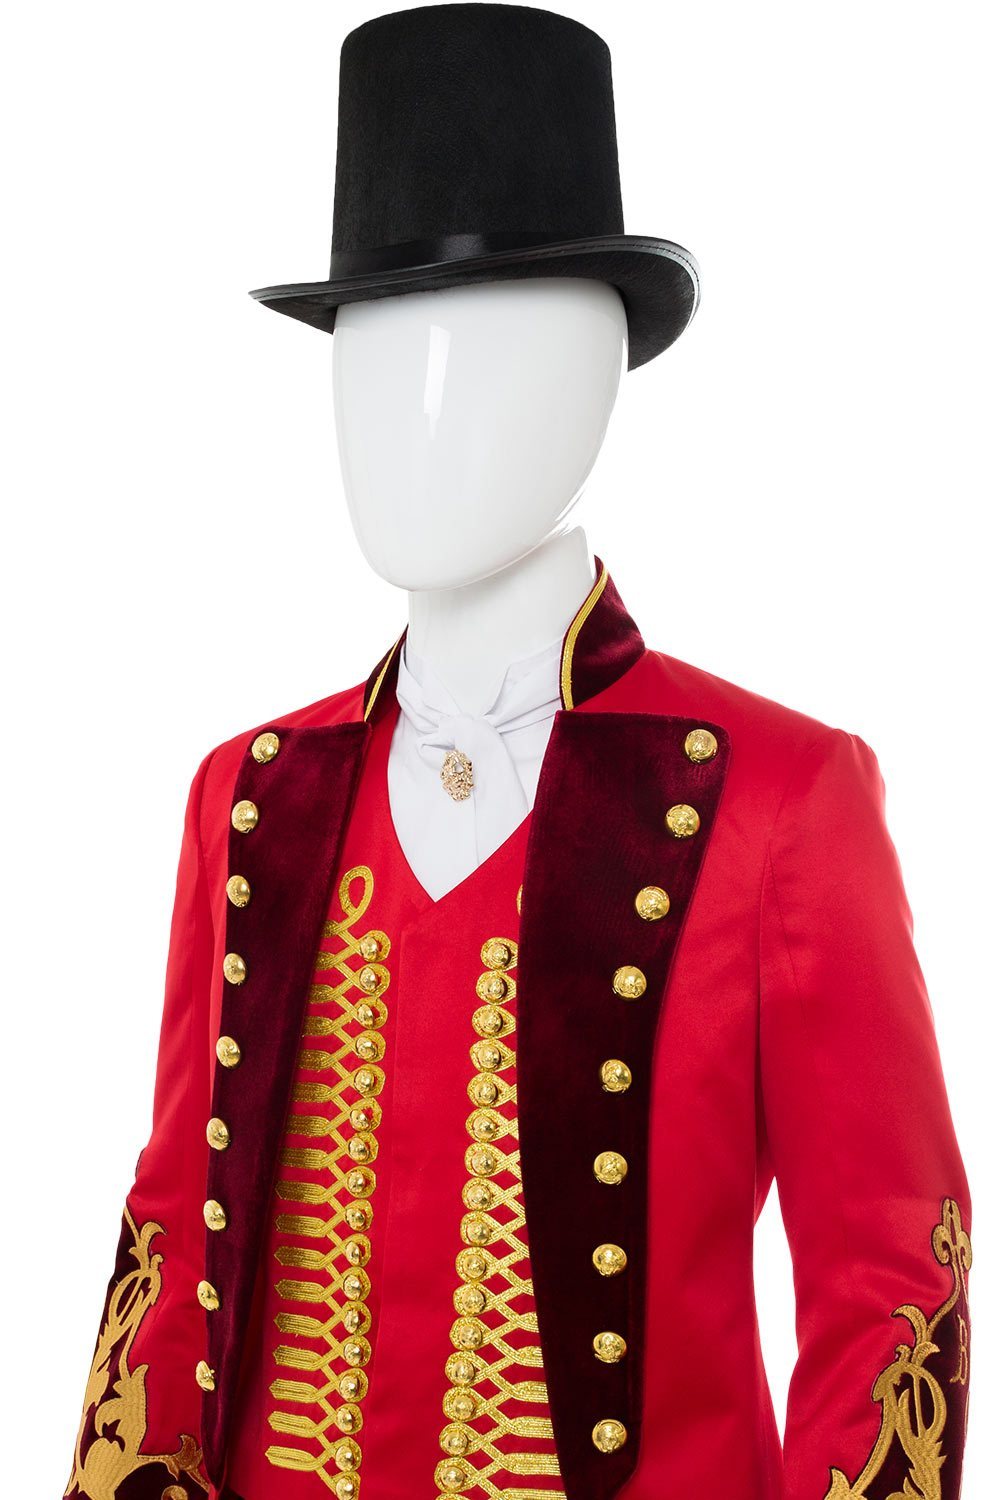 The Greatest Showman P.T. Barnum Red Suit Cosplay Costume